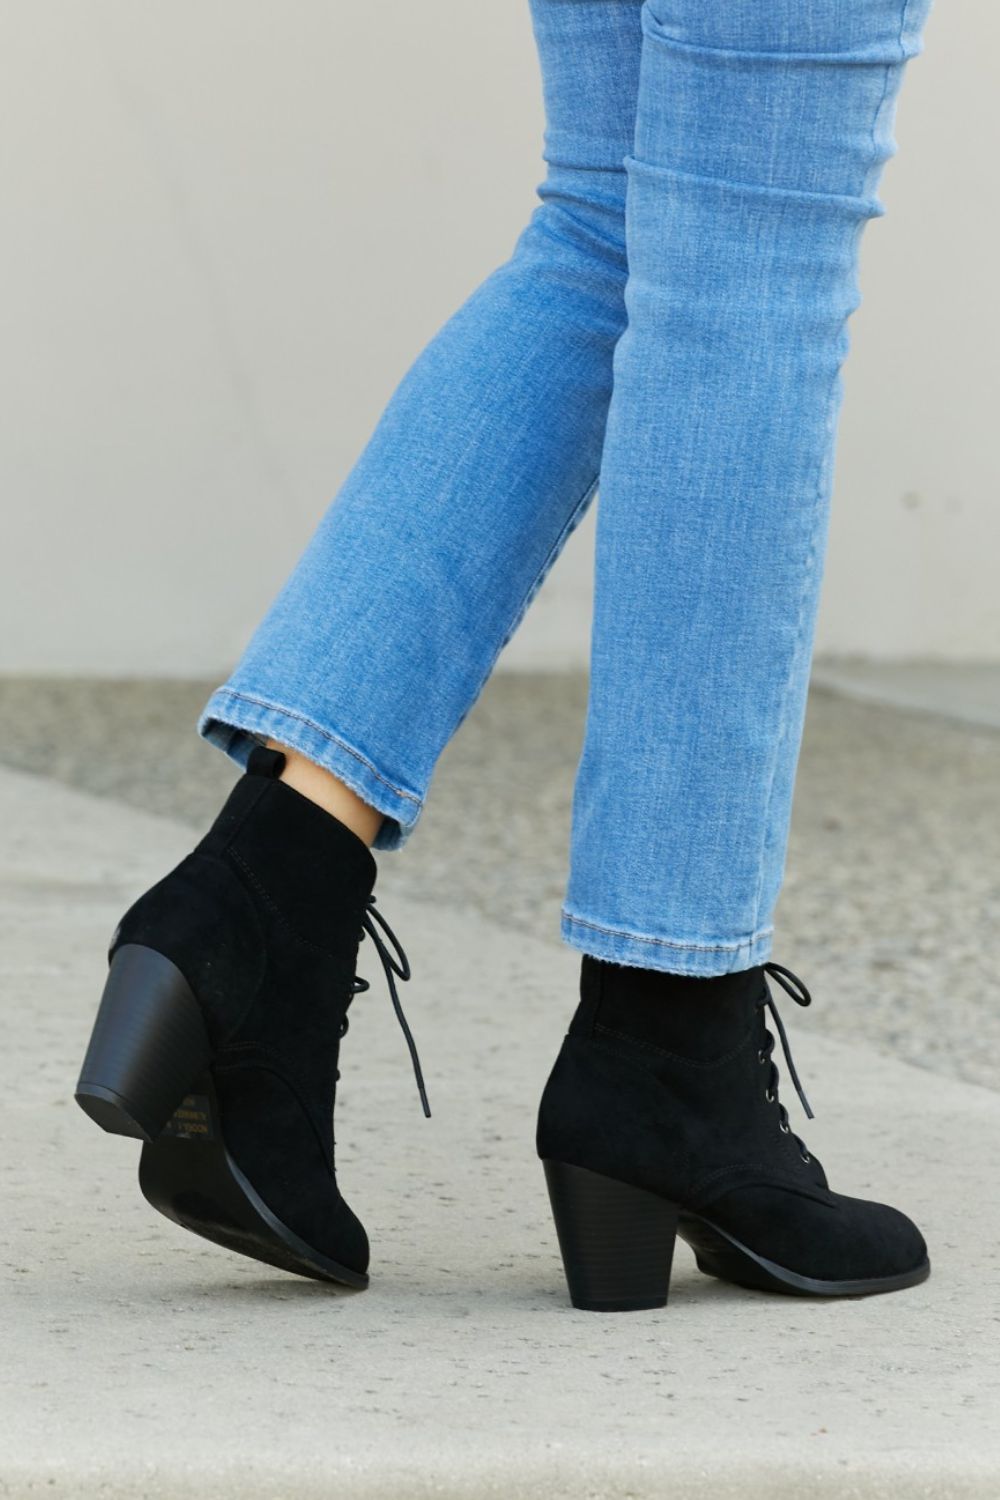 Forever Fall Lace-Up Heeled Booties in Black